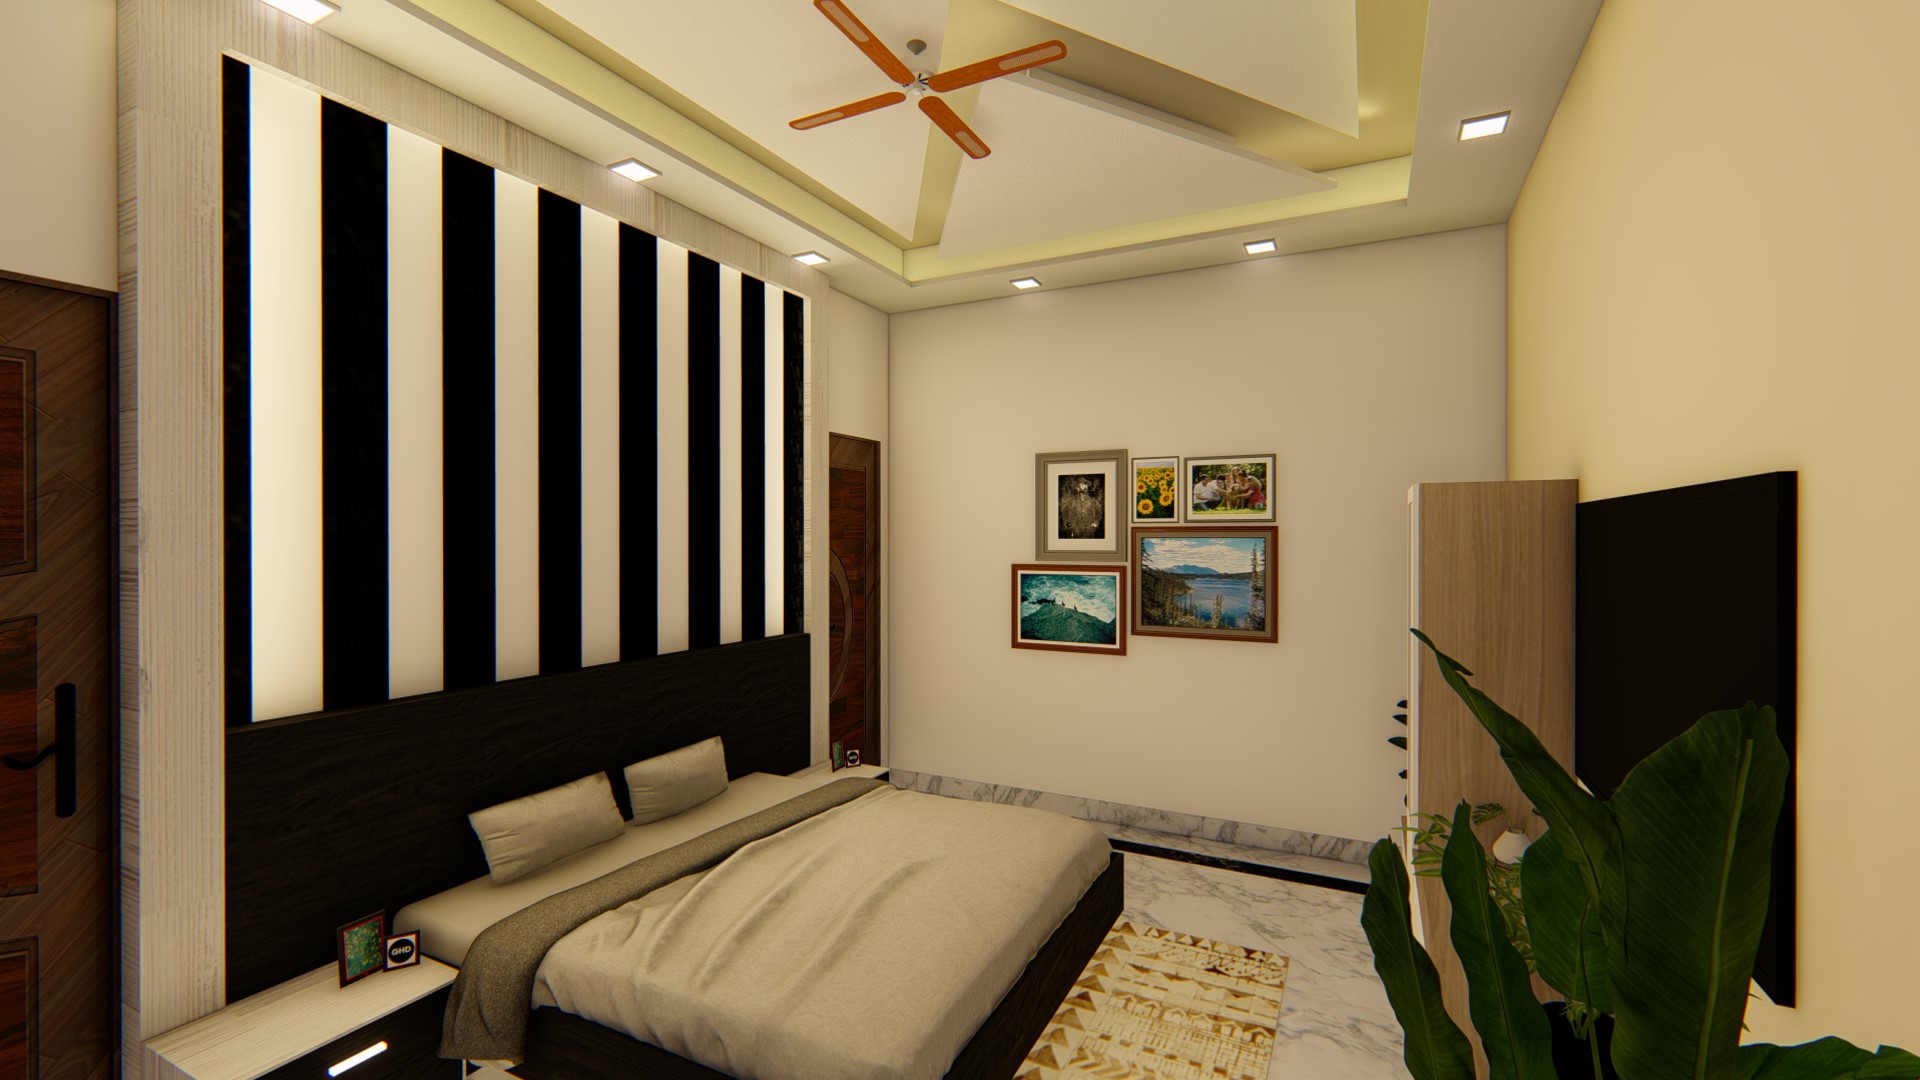 Bedroom Design With Wall Arts And Ceiling